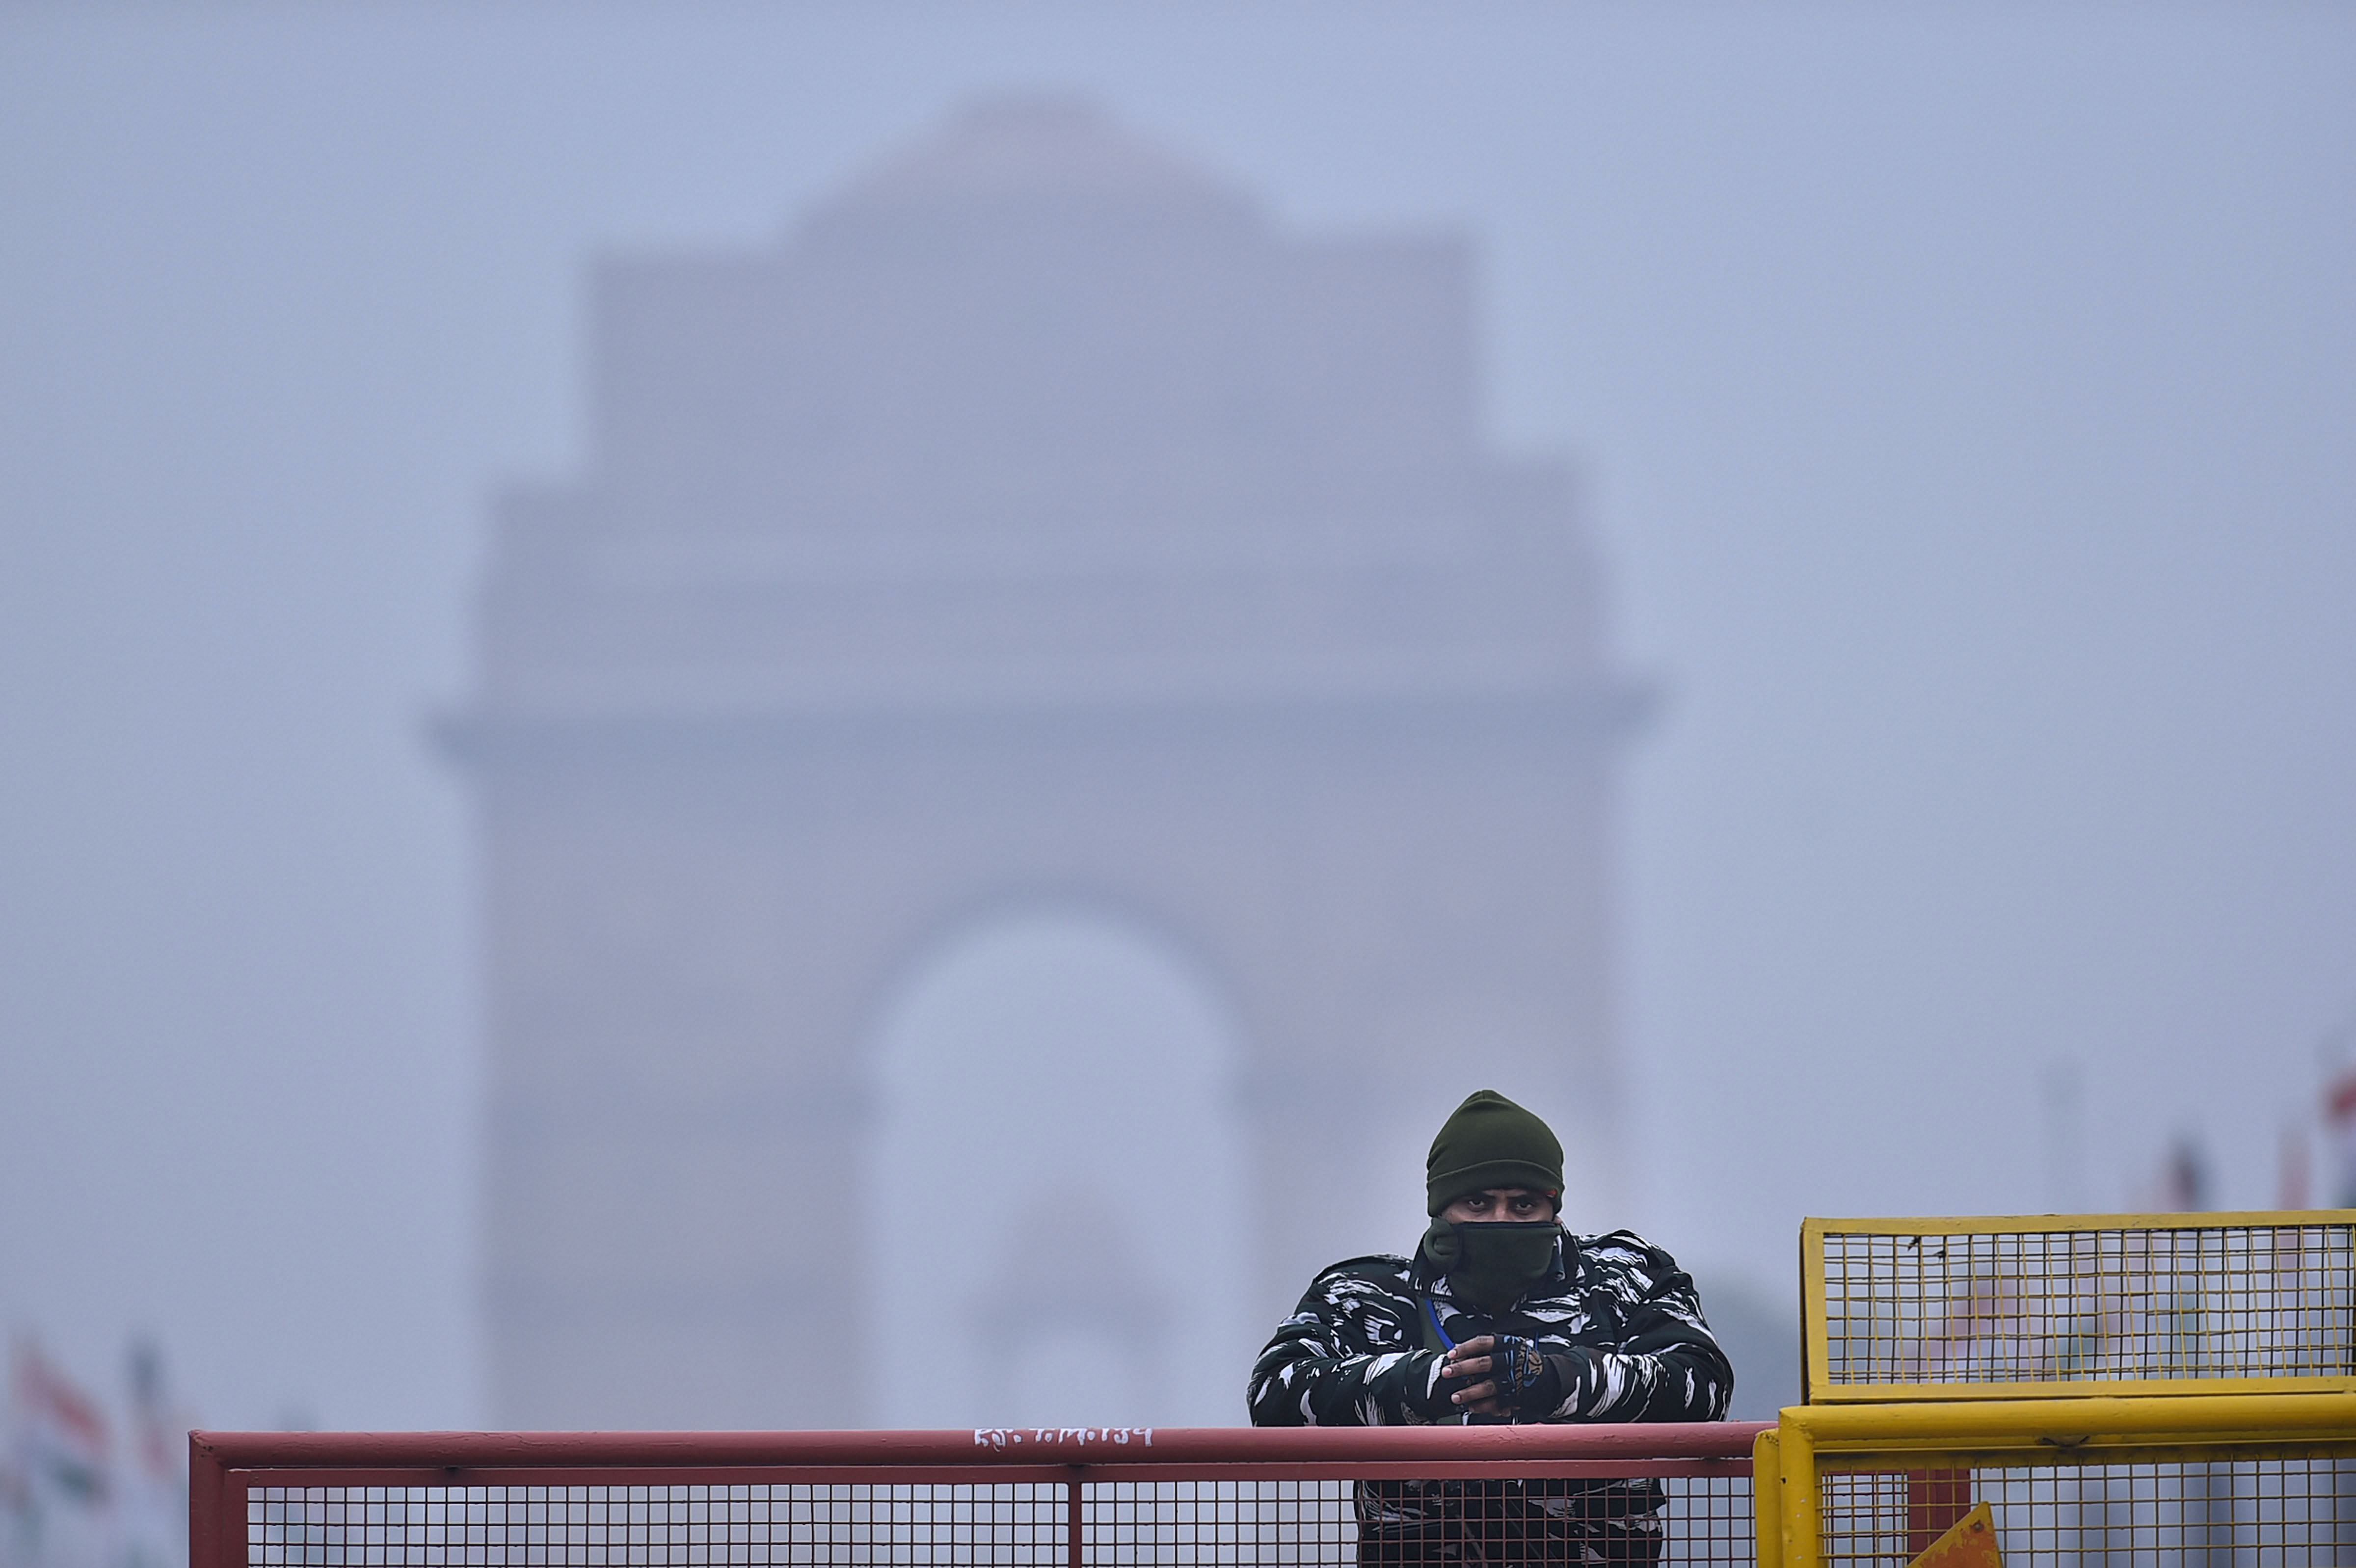  An Indian armed 'Rapid Response' team member stands guard at India Gate ahead of the Republic Day parade, in New Delhi, Sunday, Jan. 24, 2021. Credit: PTI Photo